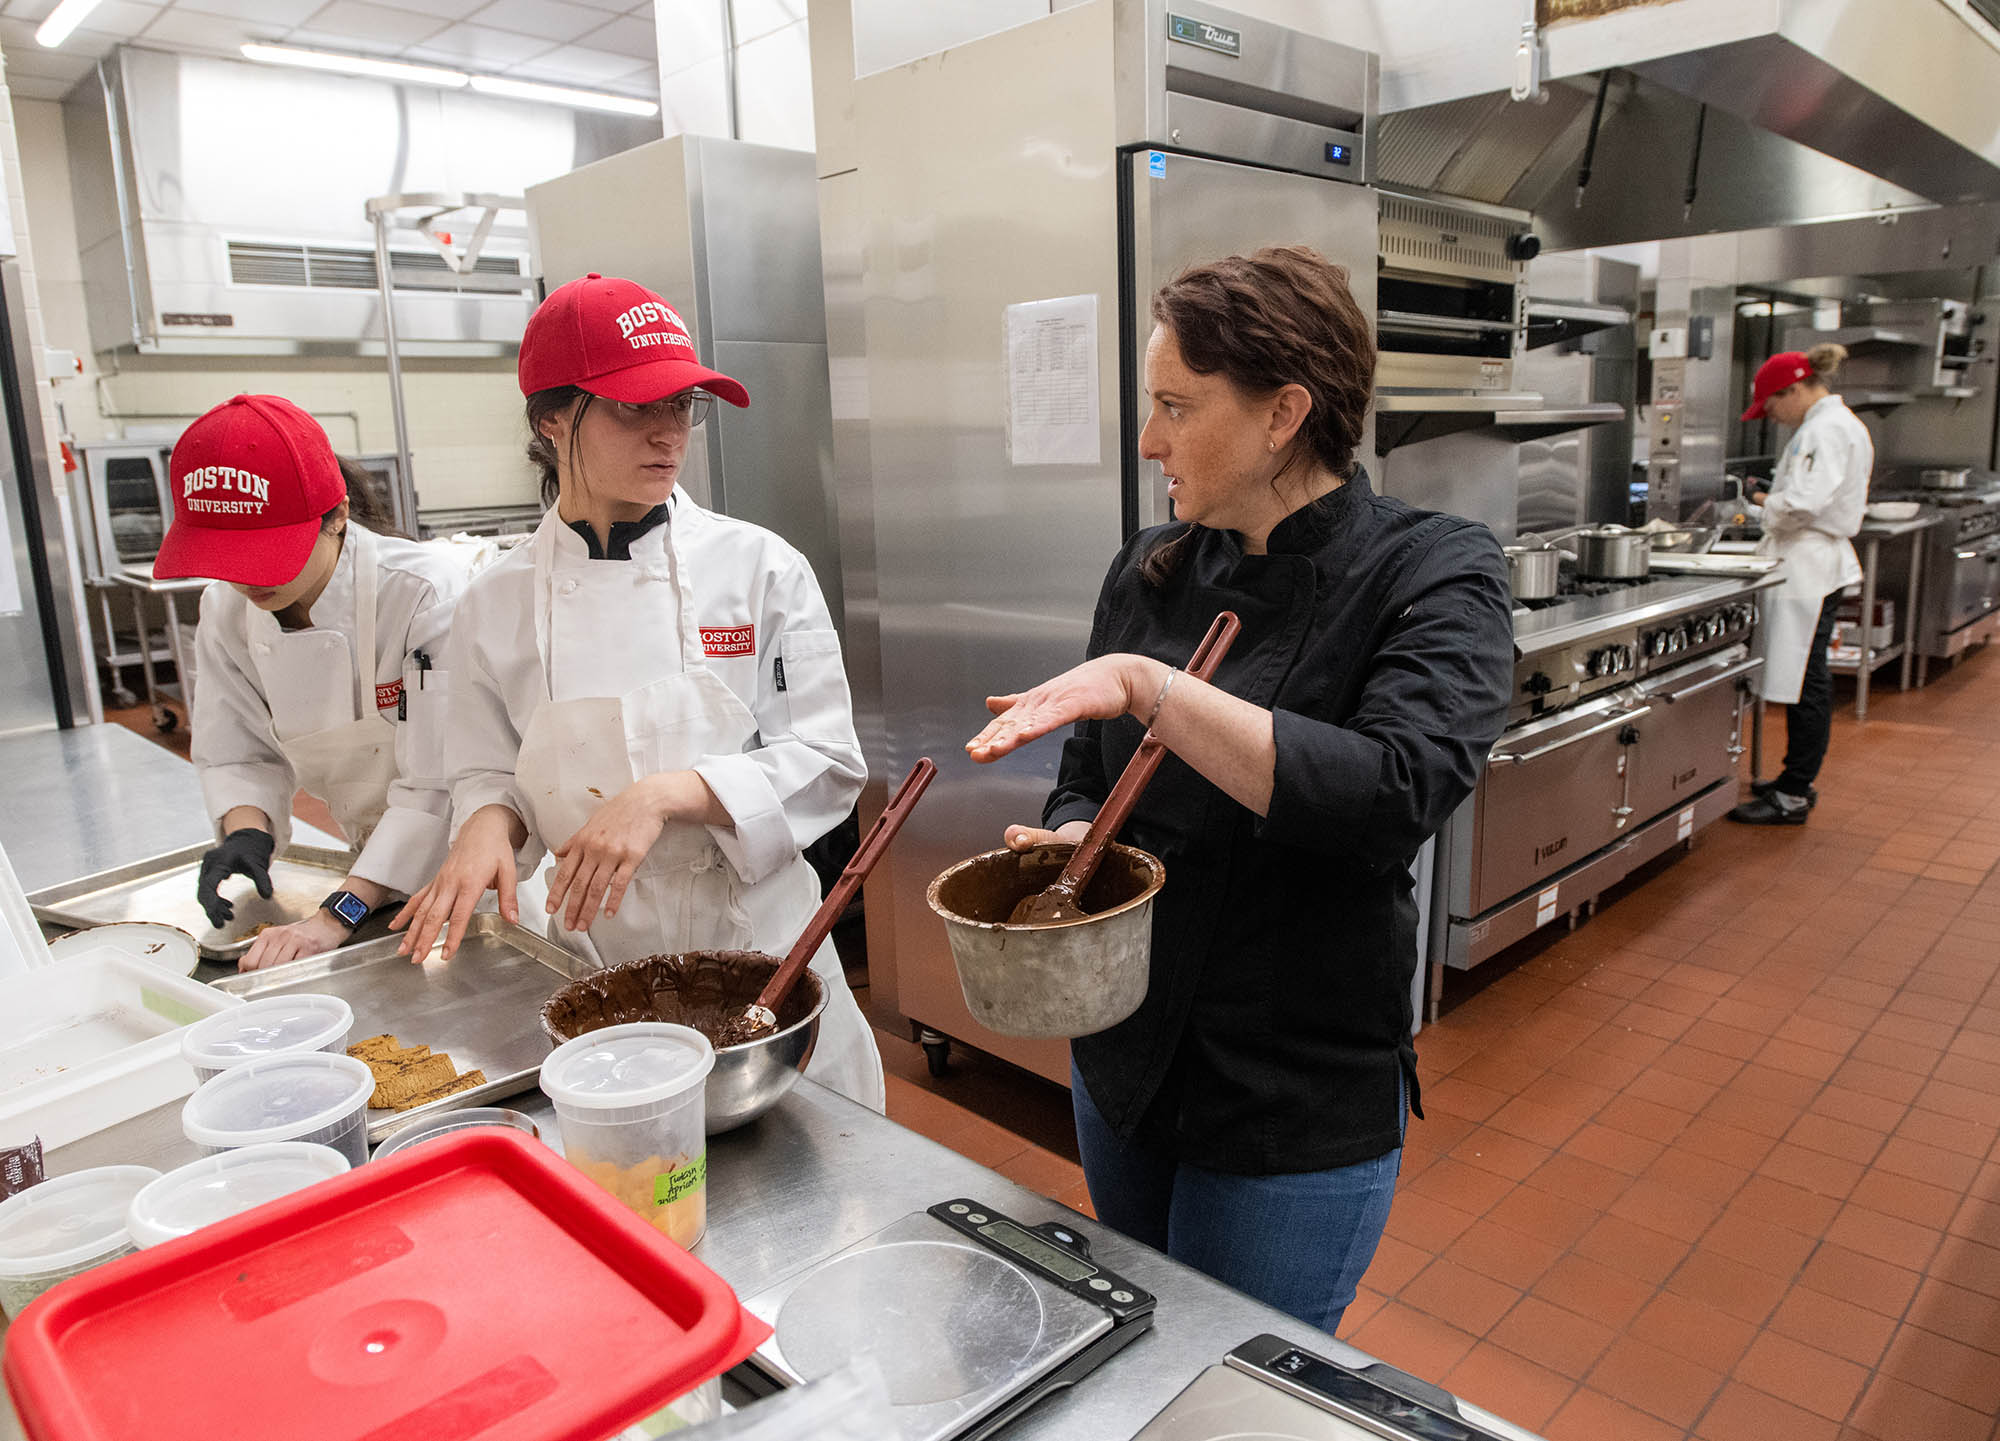 Photo: Mara Clement, a young person wearing a red BU cap and white chef's outfit, with chef instructor Anne Wolf, a woman wearing a black long-sleeved chef top and jeans, during the chocolate work class during the Professional Program in Pastry Arts March 30. Wolf holds up a large pot of chocolate as she explains something to Clement.